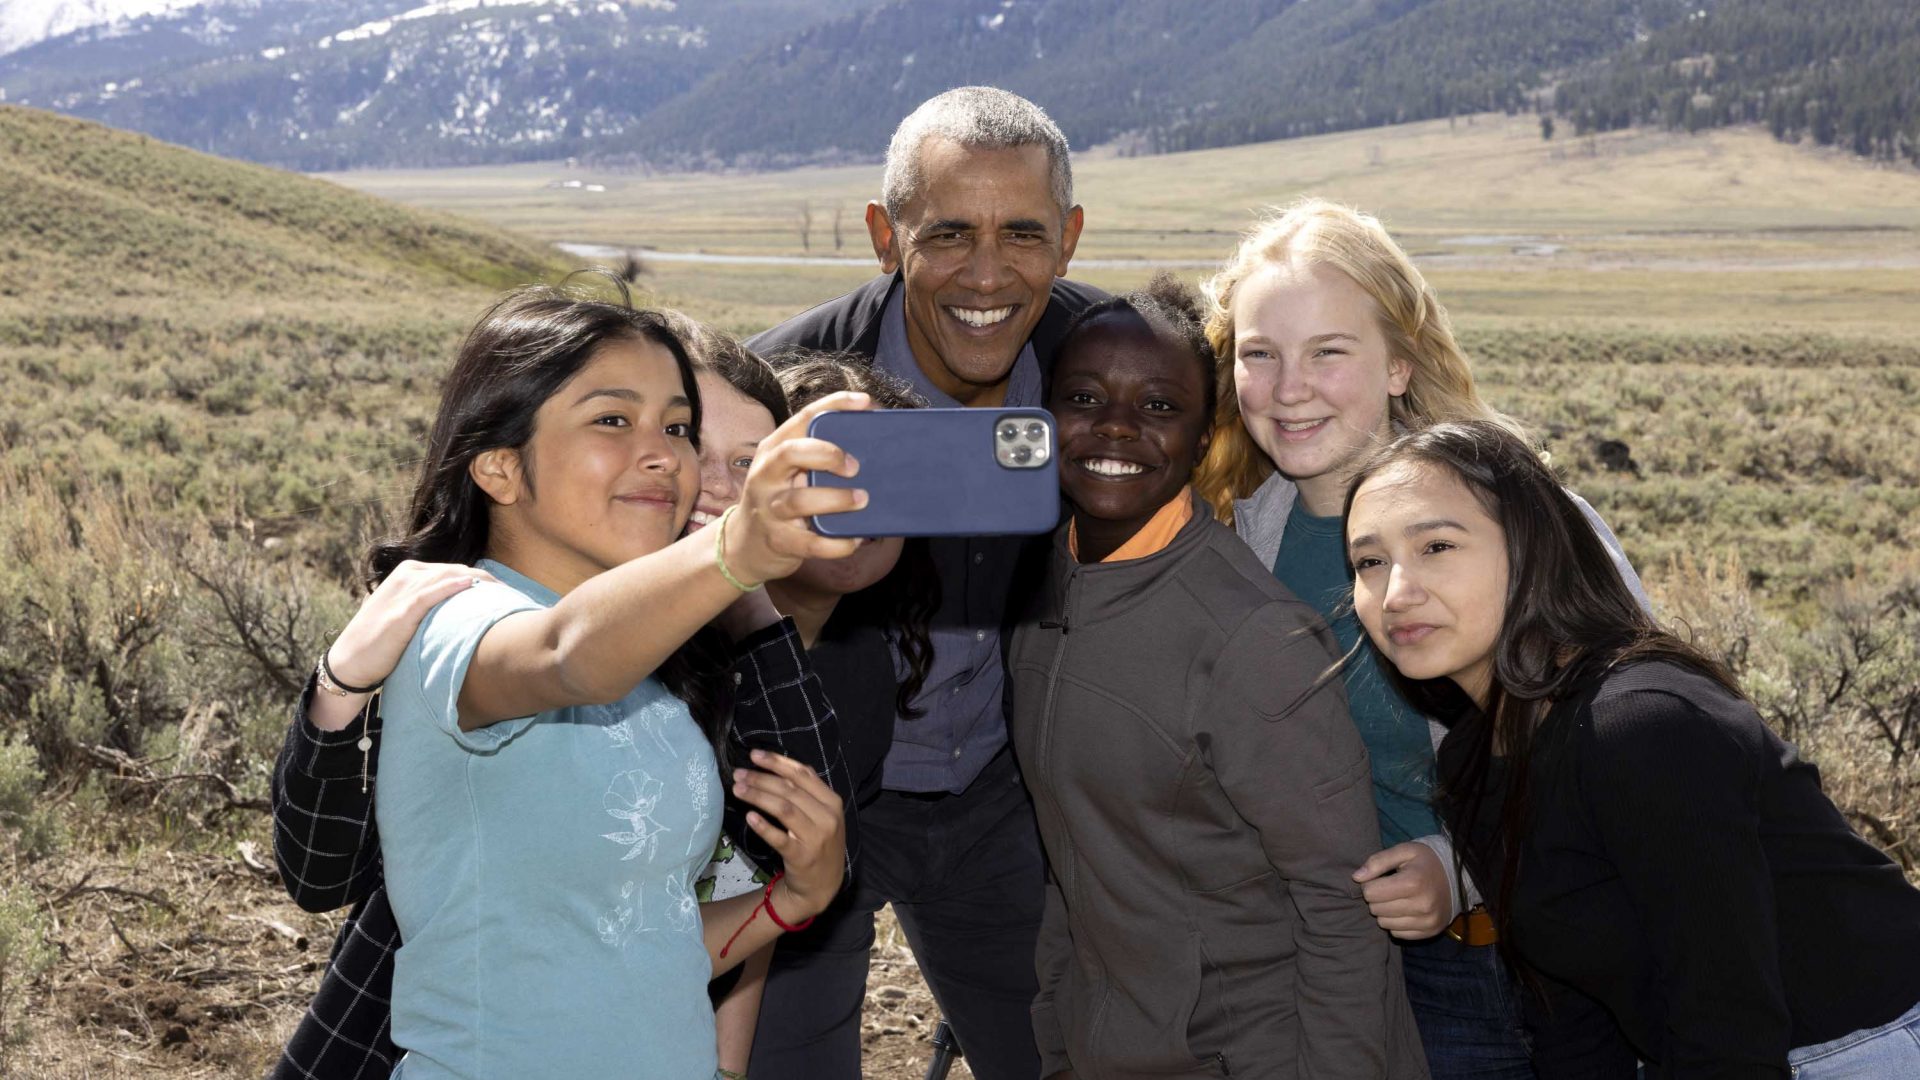 Obama smiles for a selfie with some young people while filming. He is backed by snow covered mountains.